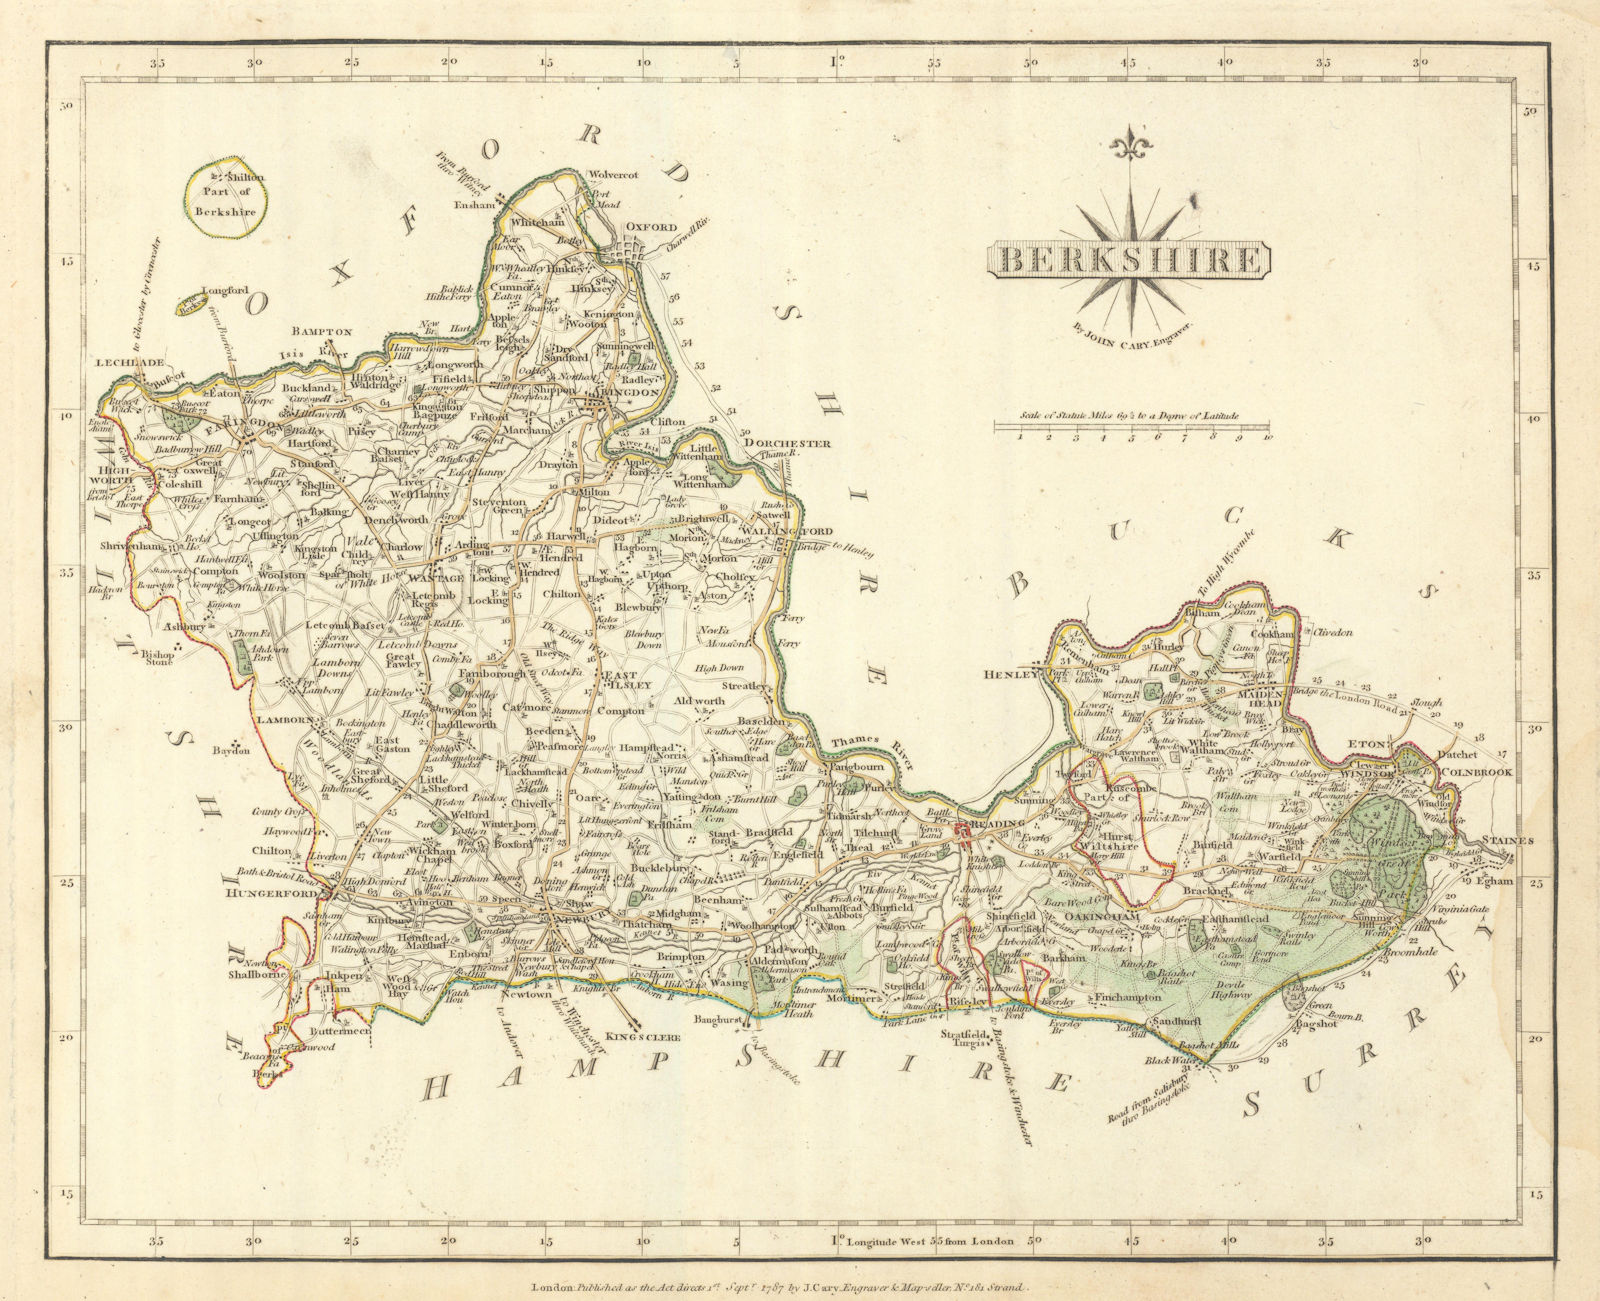 Antique county map of BERKSHIRE by JOHN CARY. Original outline colour 1793